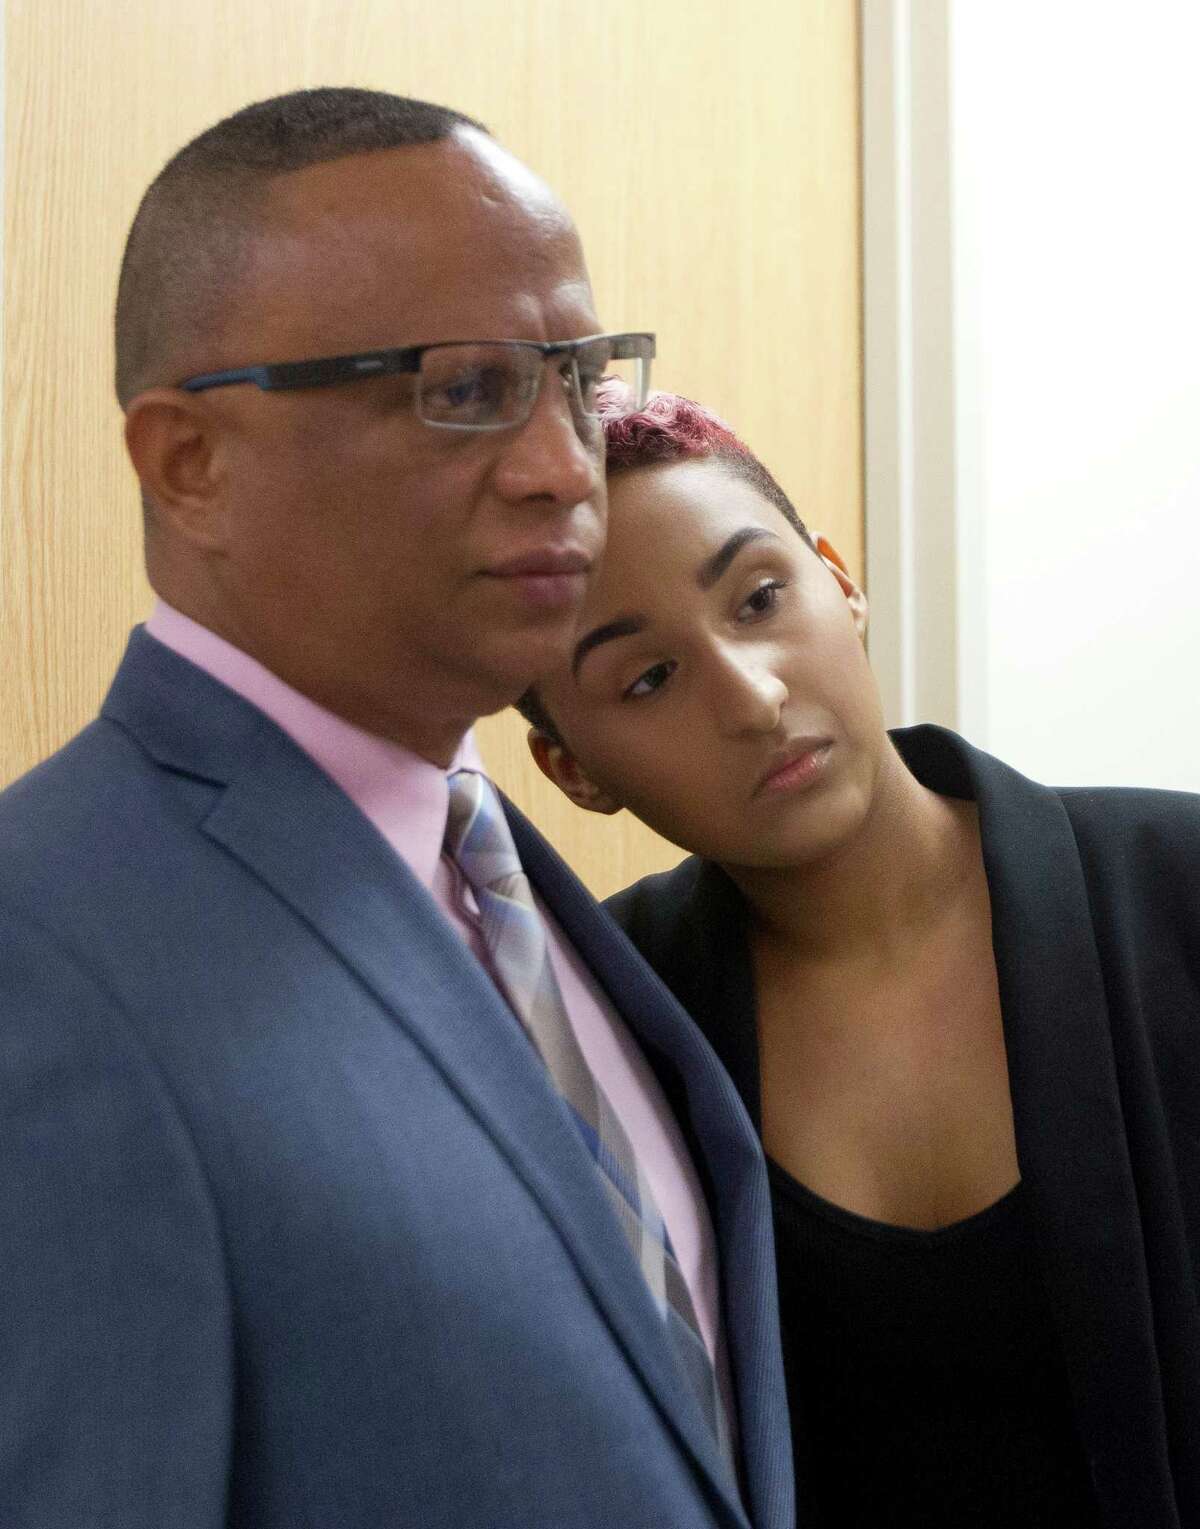 Mia Sosa, right, rests her head on the shoulder of her father Ramon as he speaks with the media following the sentencing of his wife Maria to 20 years in prison after pleading guilty to solicitation of murder Tuesday, Oct. 11, 2016, in the Lee G. Alworth building in Conroe.